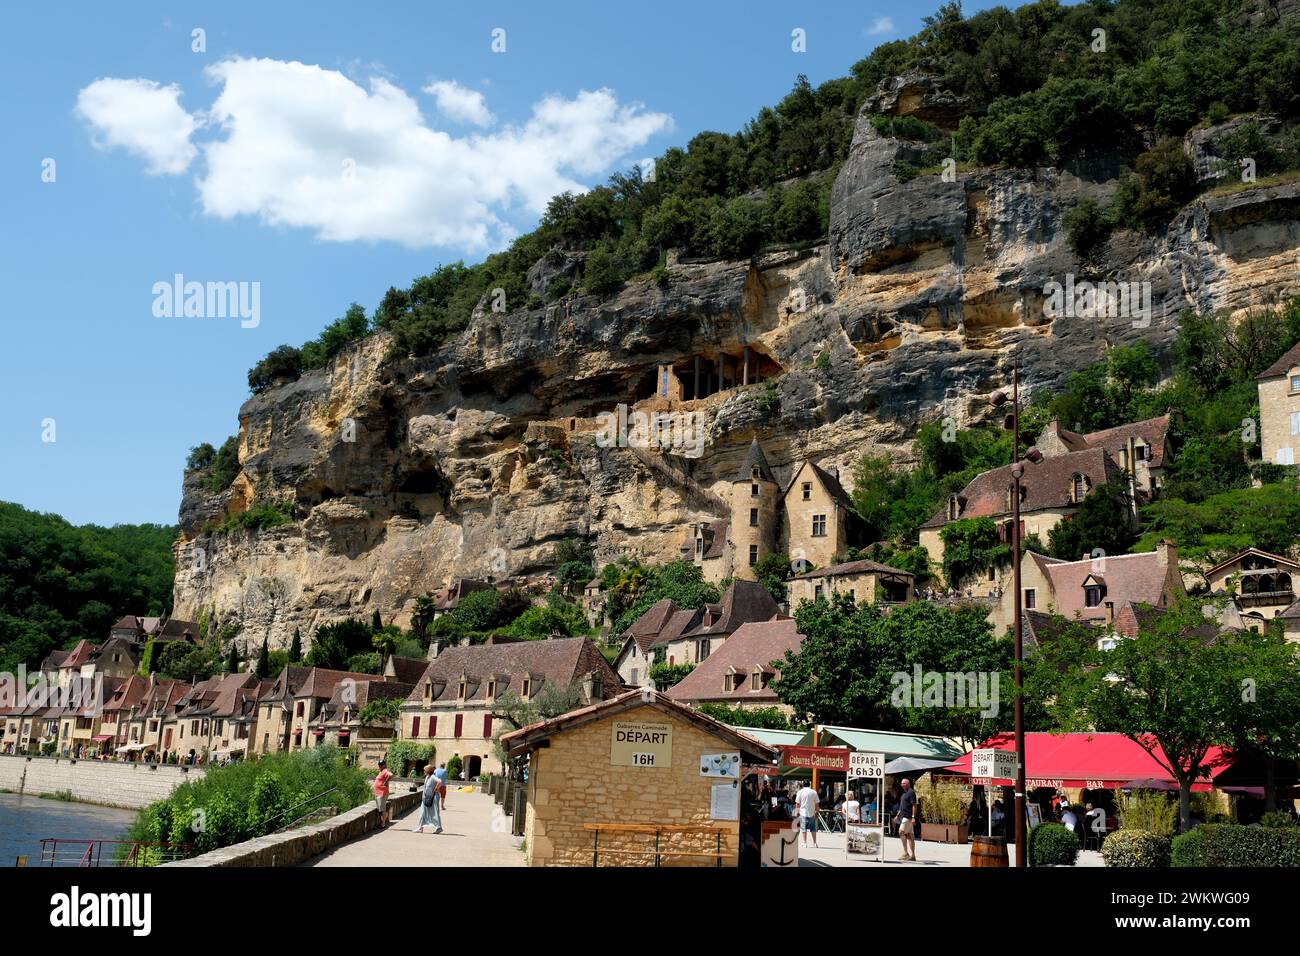 The picturesque French village of La Roque-Gageac on the banks of the Dordogne River is a favorite destination for tourists and water sport lovers Stock Photo